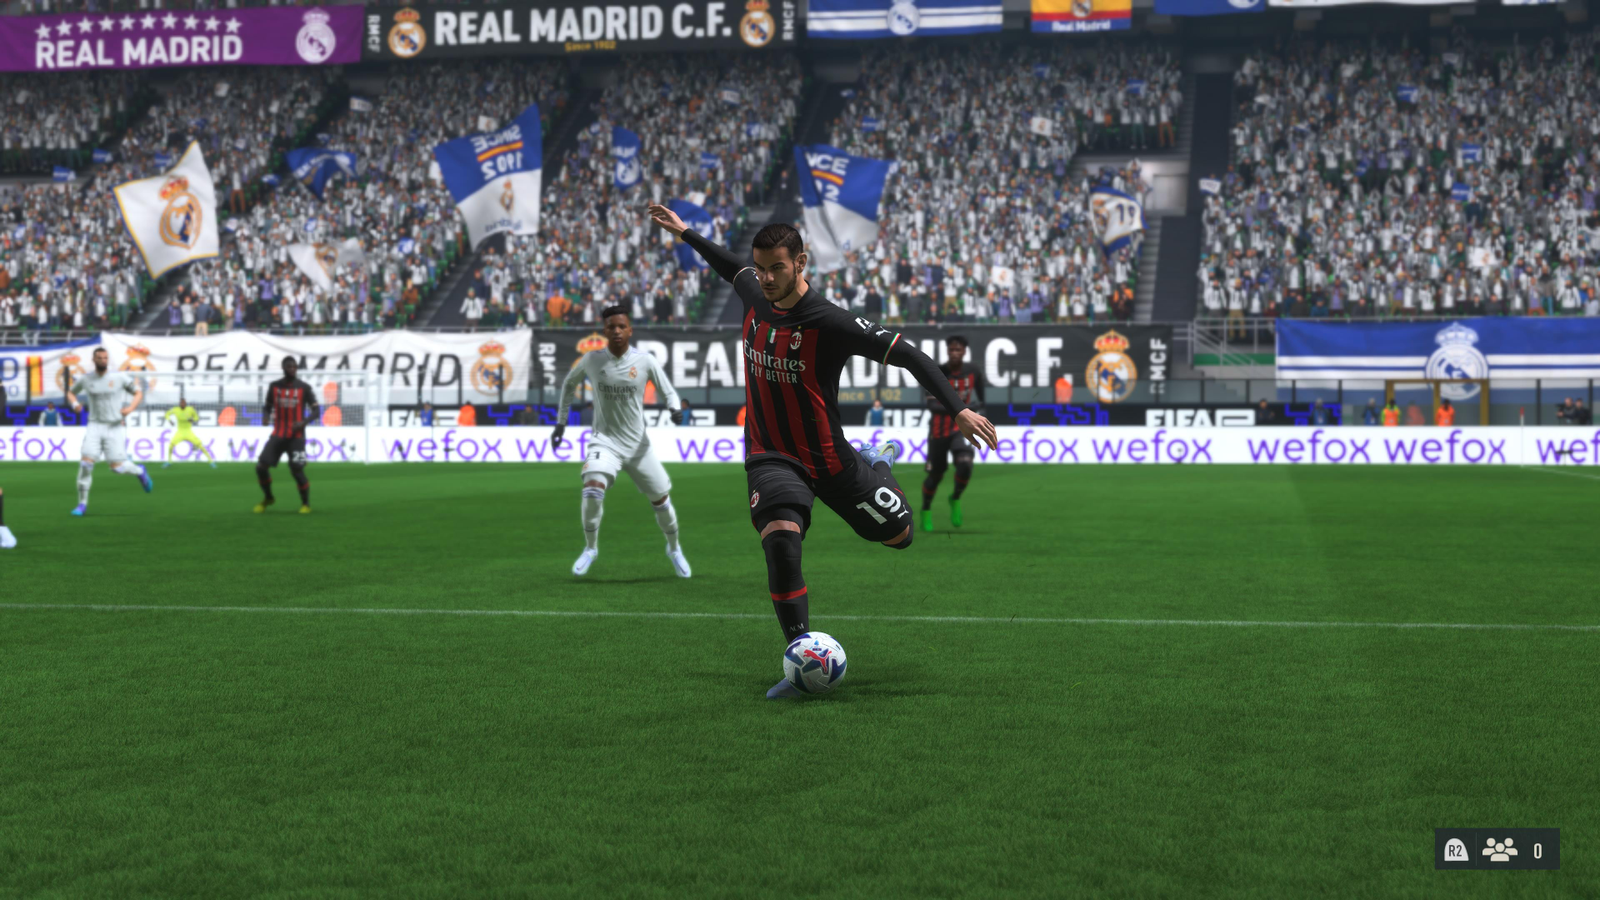 FIFA 23 review: Stunning graphics, new ratings and improved